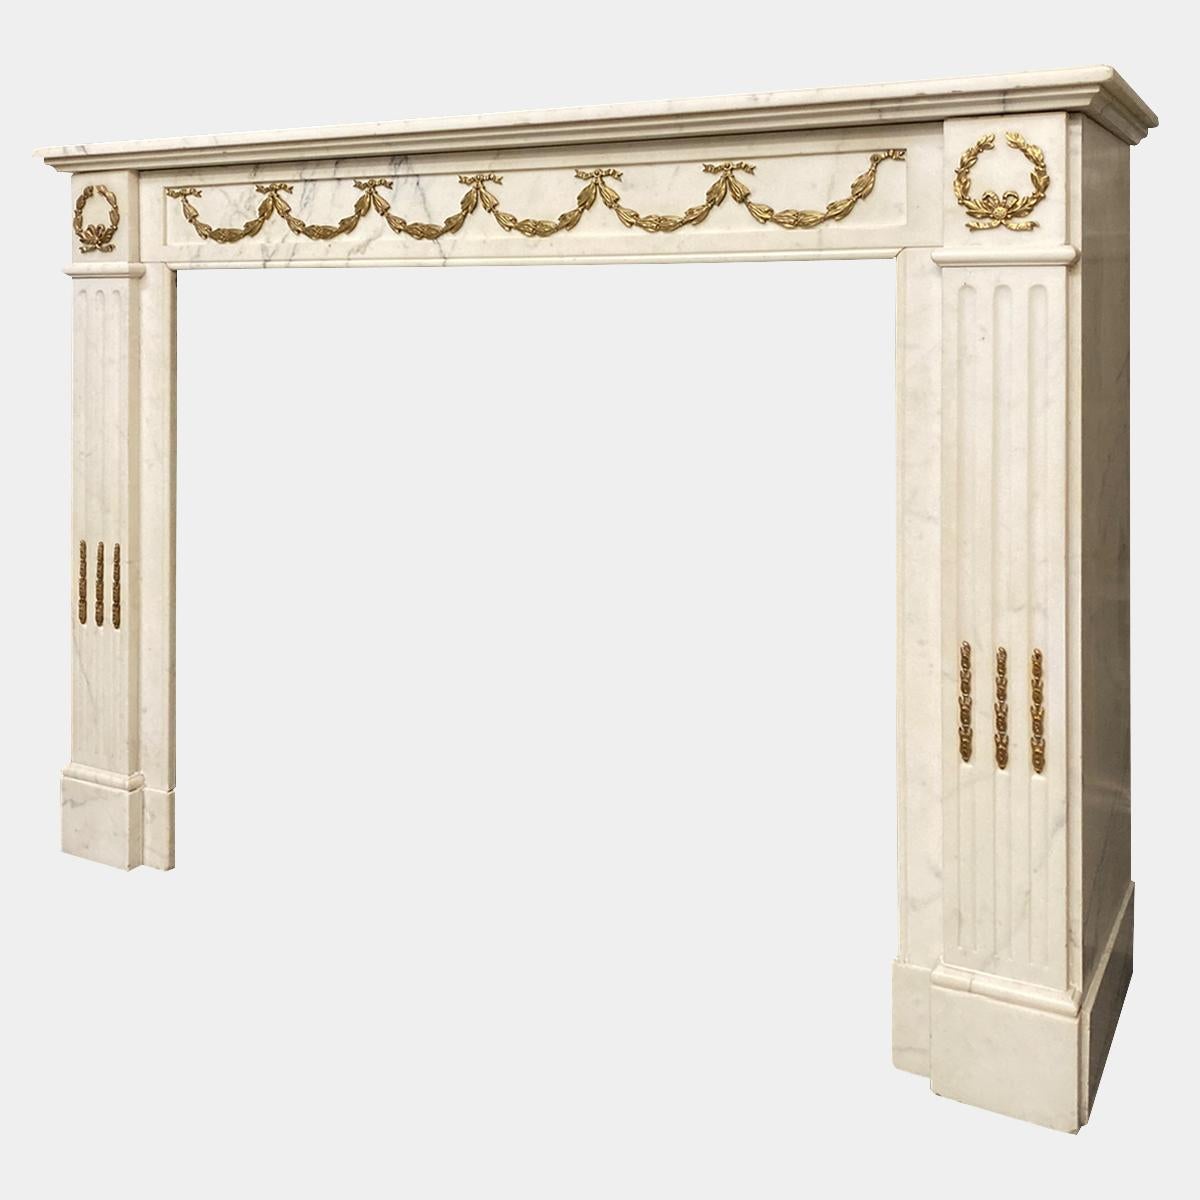 A Statuary white marble and gilt ormolu antique fireplace in the Louis XVI style. The panelled frieze with ormolu bell flower swags, flanked by end blocks of ribbon tied ormolu laurel leafs. The flute jambs with ormolu husks. All beneath a stepped